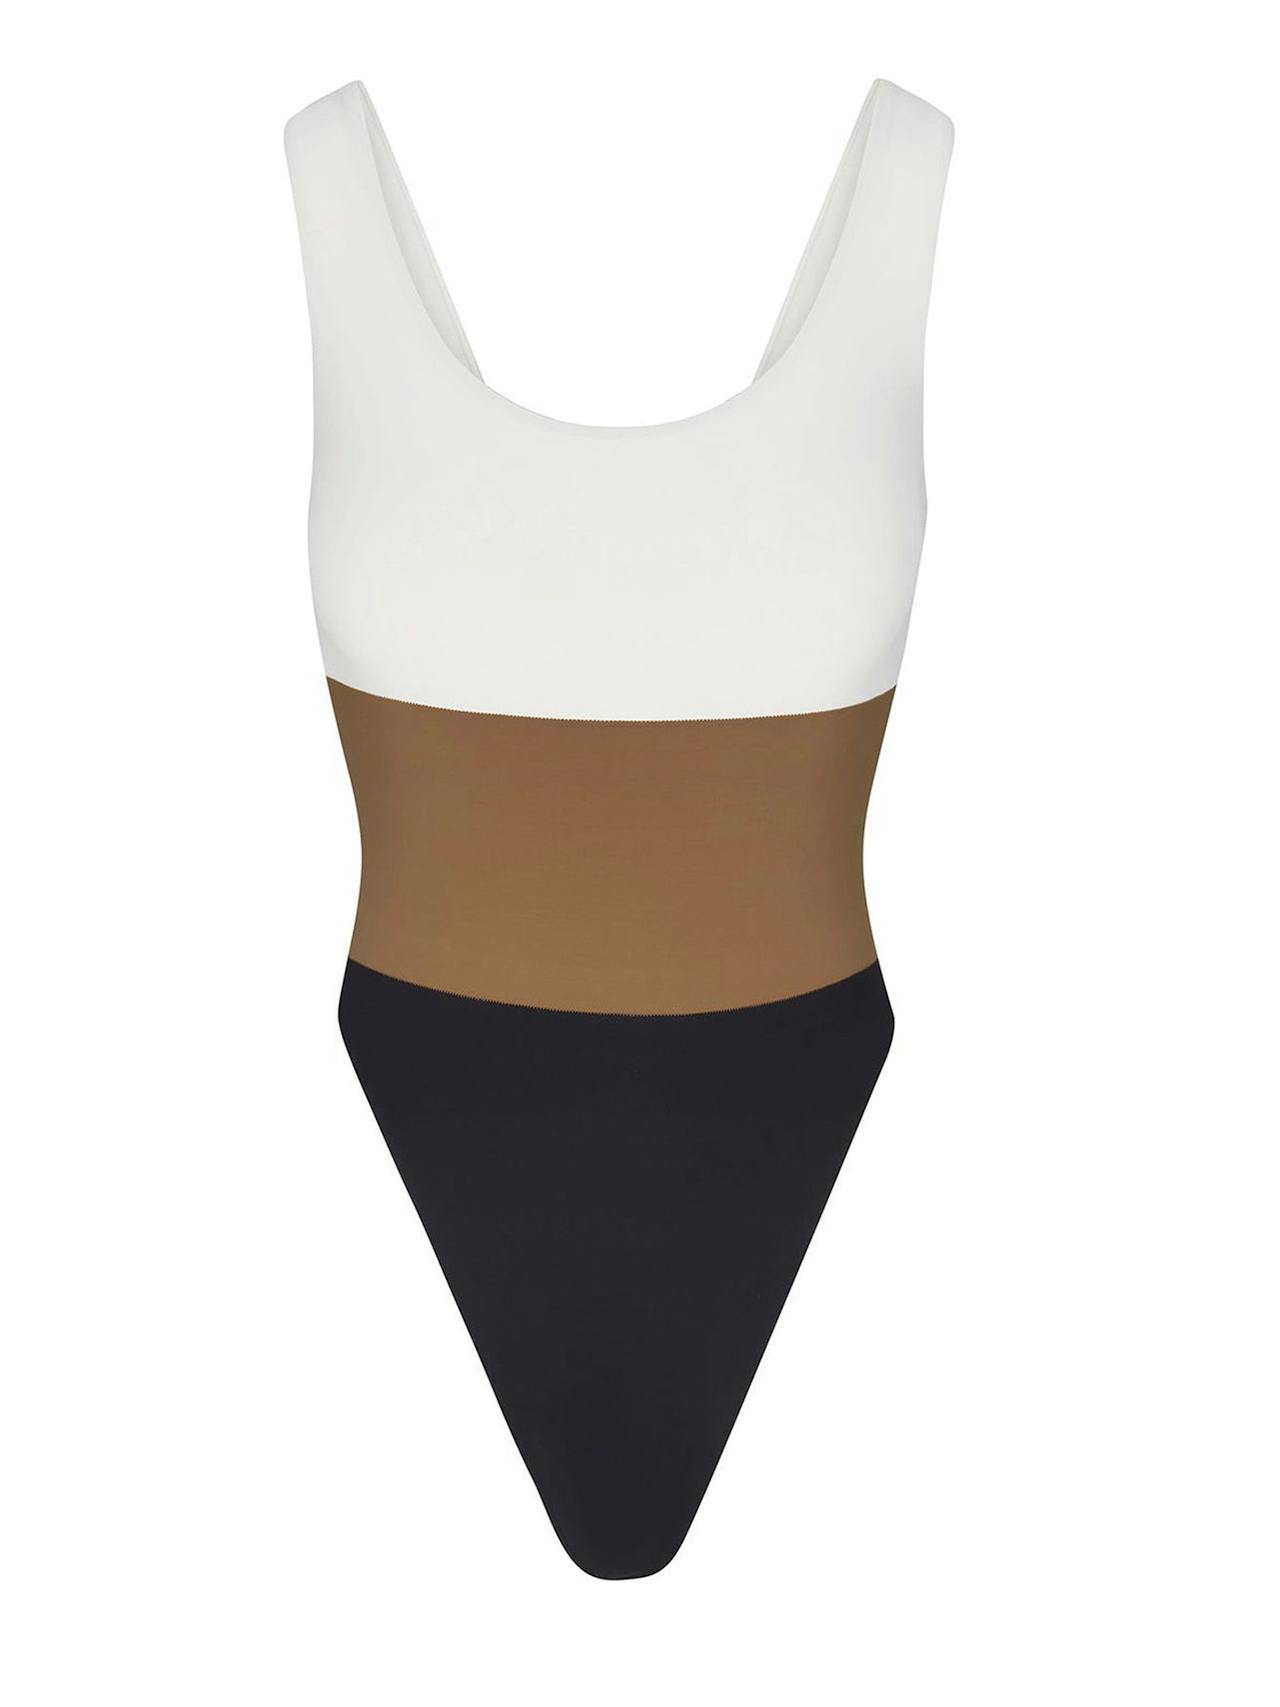 Hume tricolor one-piece